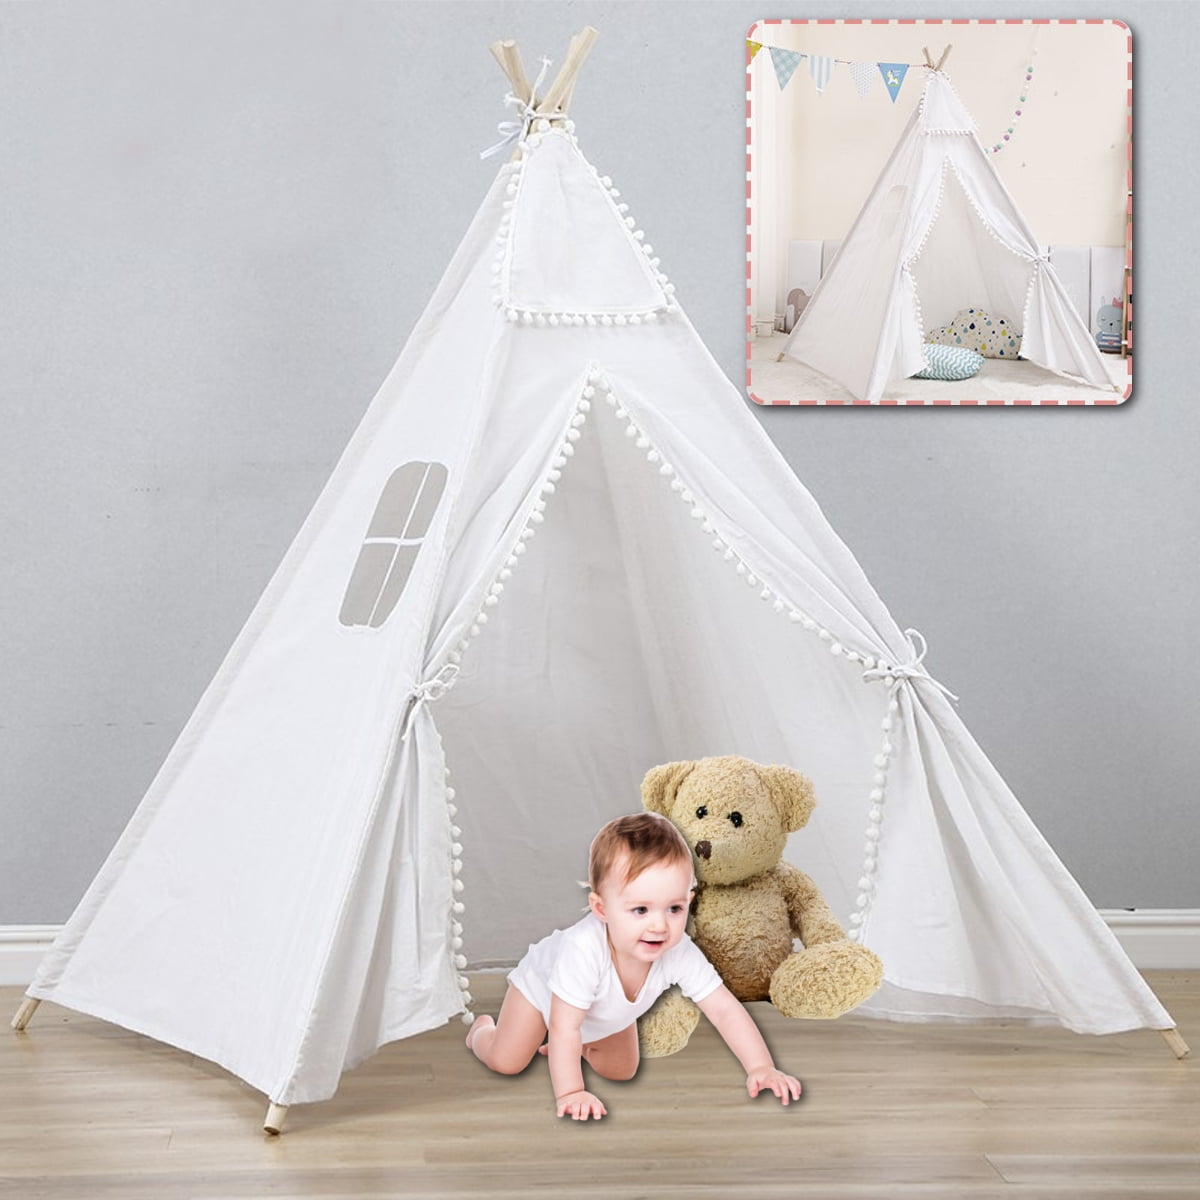 Details about   Baby Play Tent Teepee Kids Playhouse Sleeping Dome Portable Foldable Cotton 